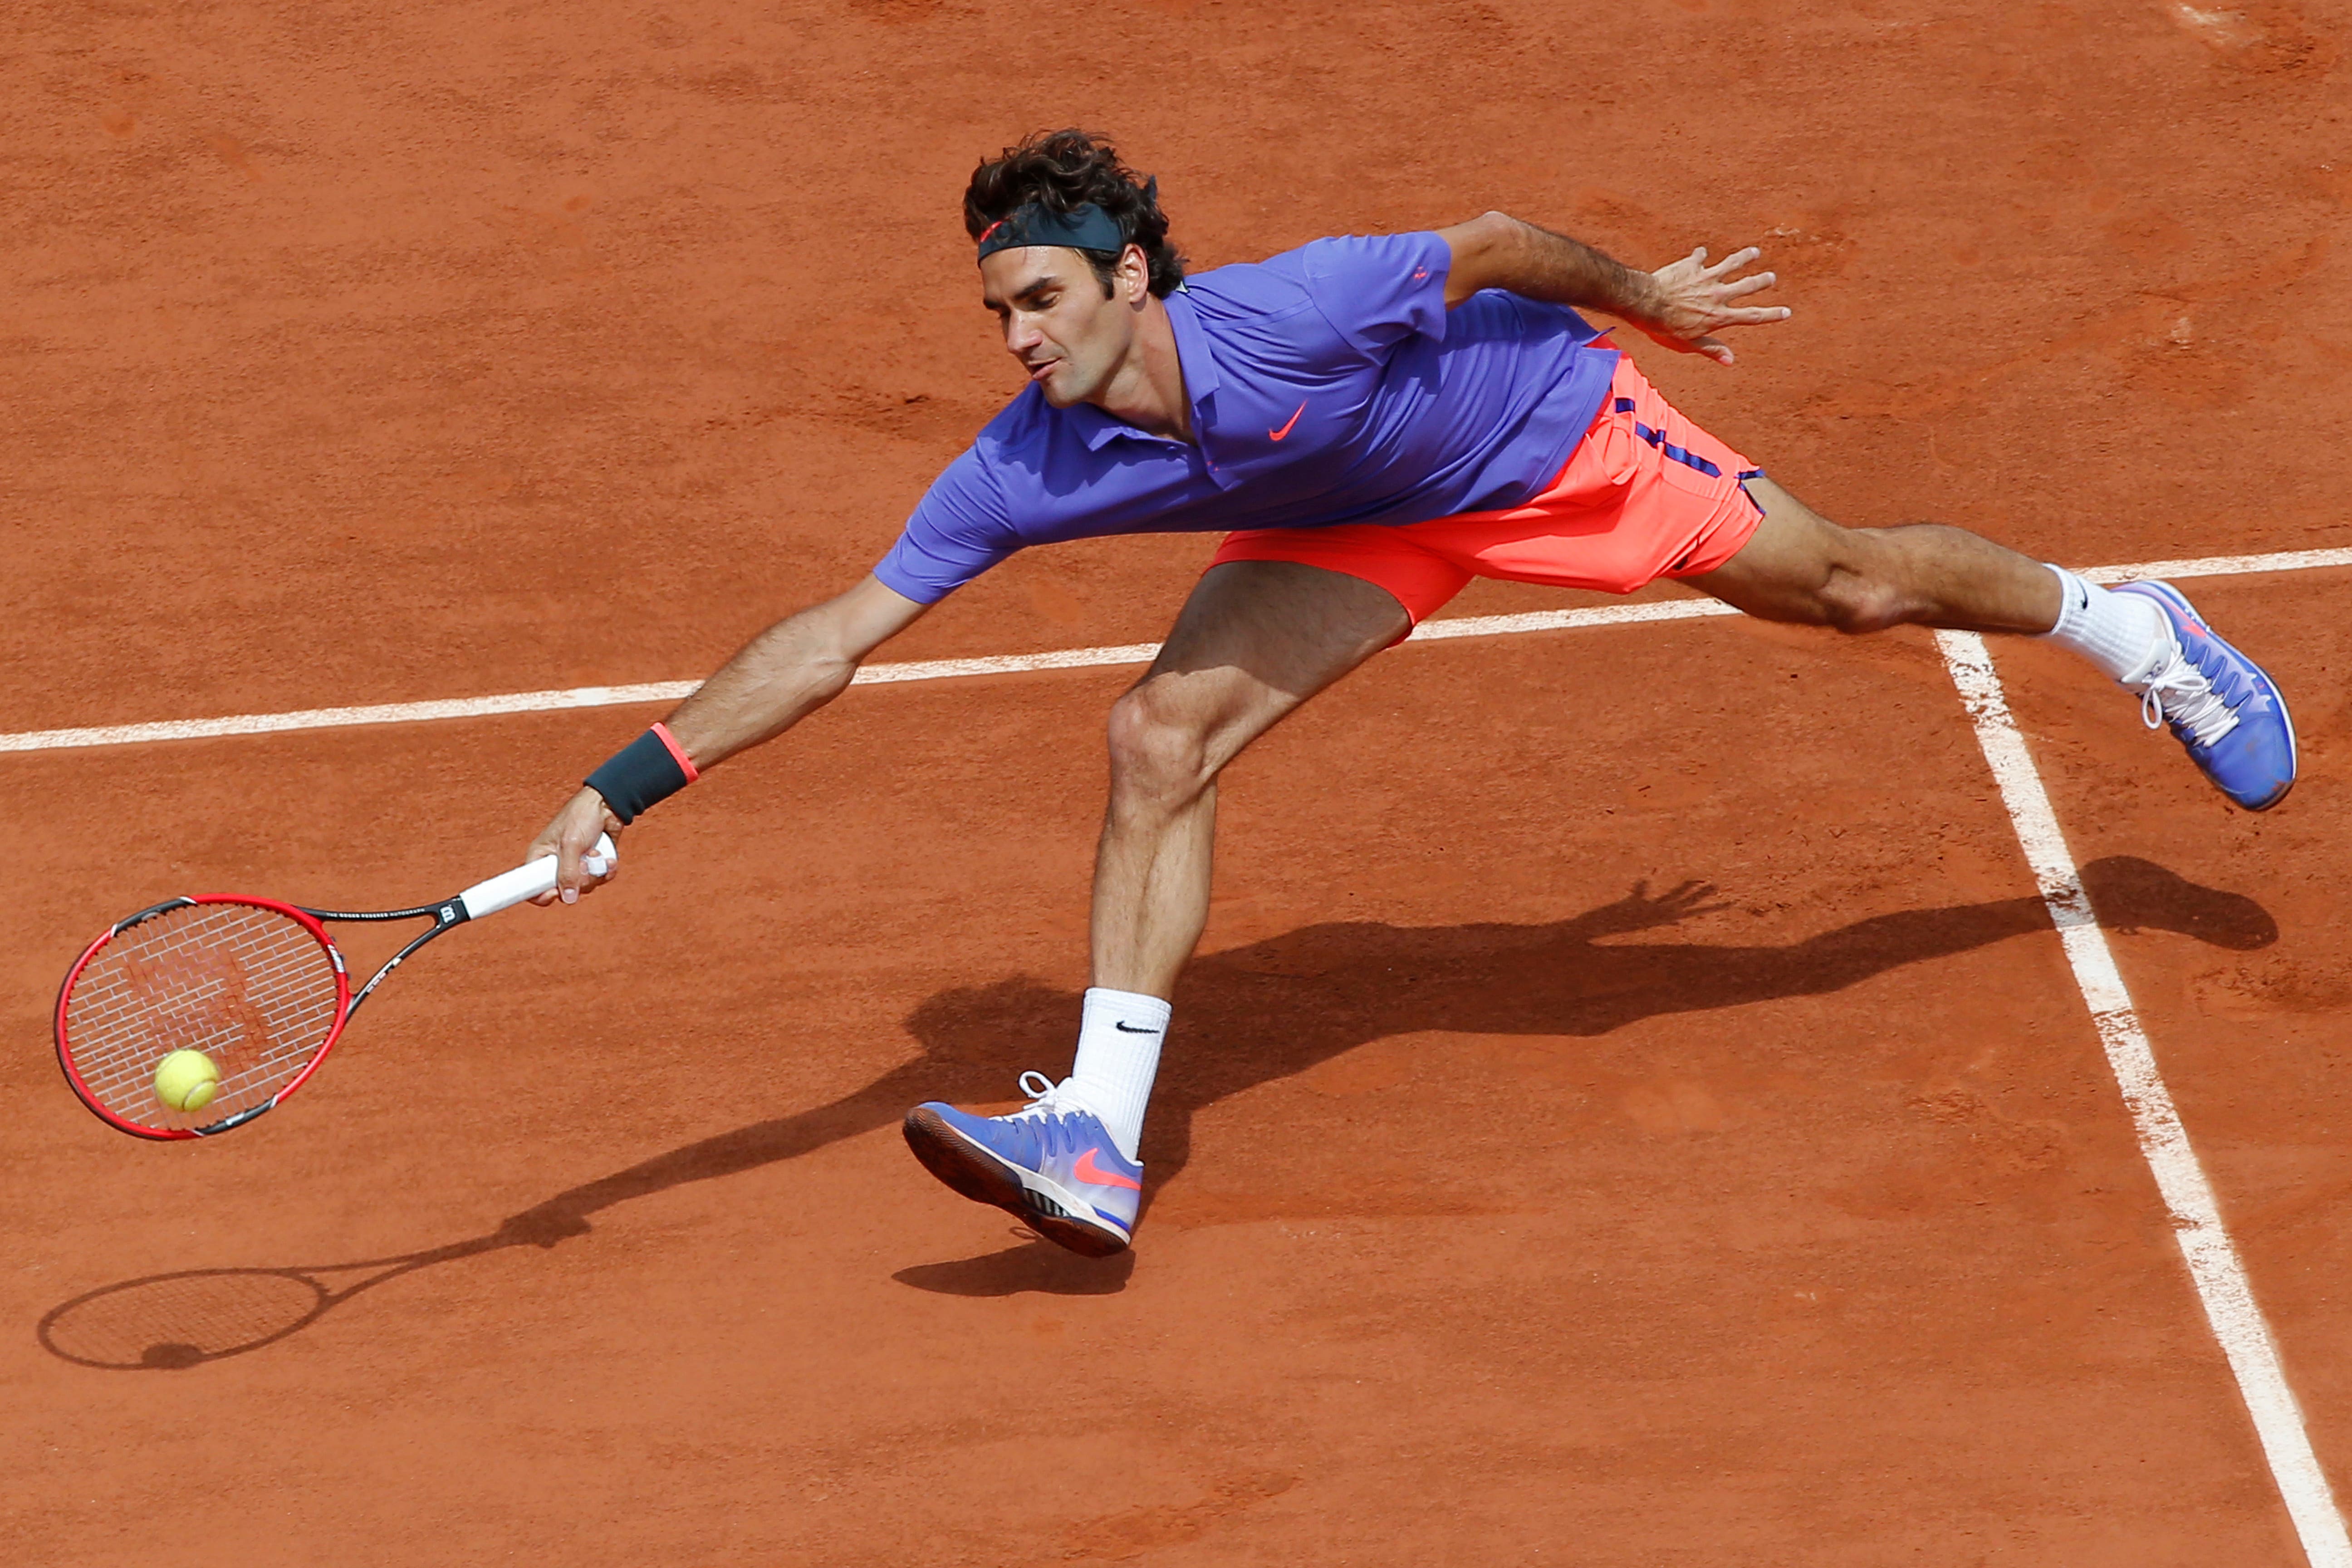 Switzerland's Roger Federer returns in the third round match of the French Open tennis tournament against Bosnia and Herzegovina's Damir Dzumhur at the Roland Garros stadium, in Paris, France, Friday, May 29, 2015.  (AP)